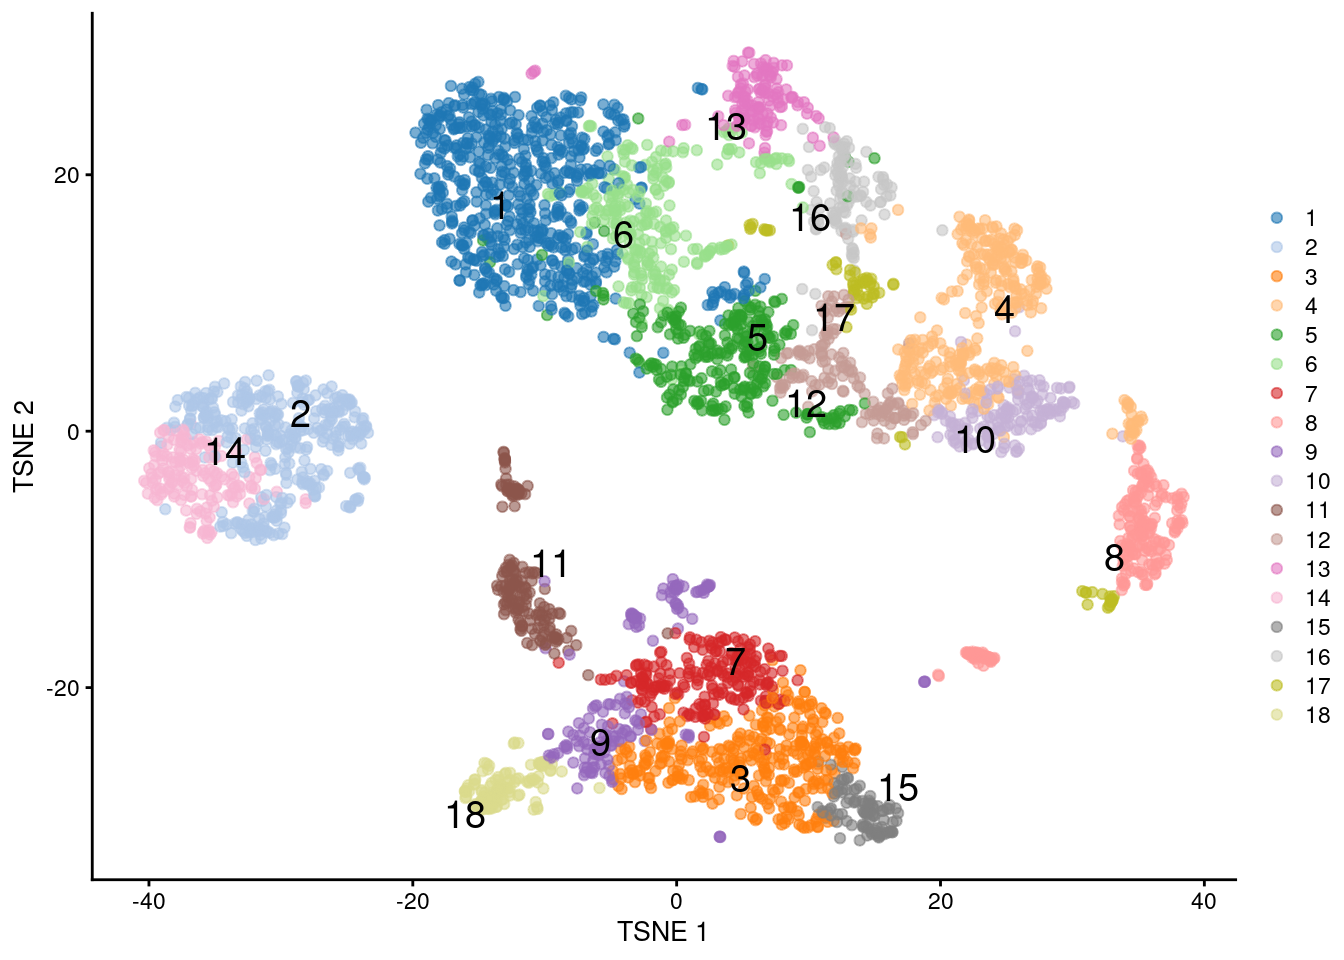 $t$-SNE plot of the PBMC dataset, where each point represents a cell and is coloured according to the identity of the assigned cluster from combined $k$-means/hierarchical clustering.